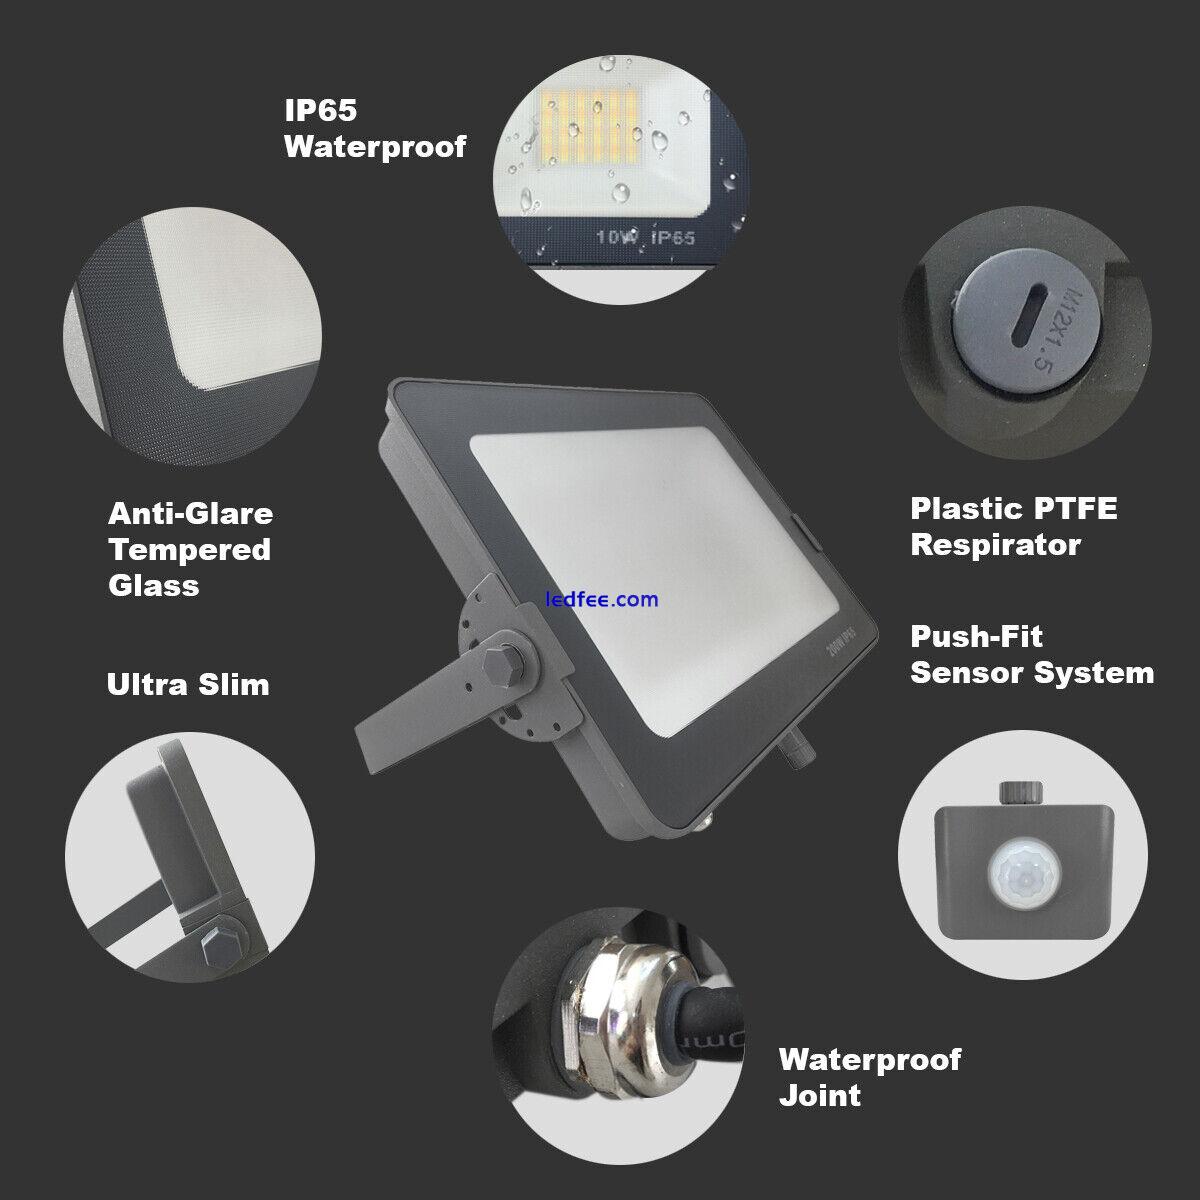 Infinity LED Floodlights With PIR/Photocell Motion-Activated Dusk to Dawn Sensor 1 